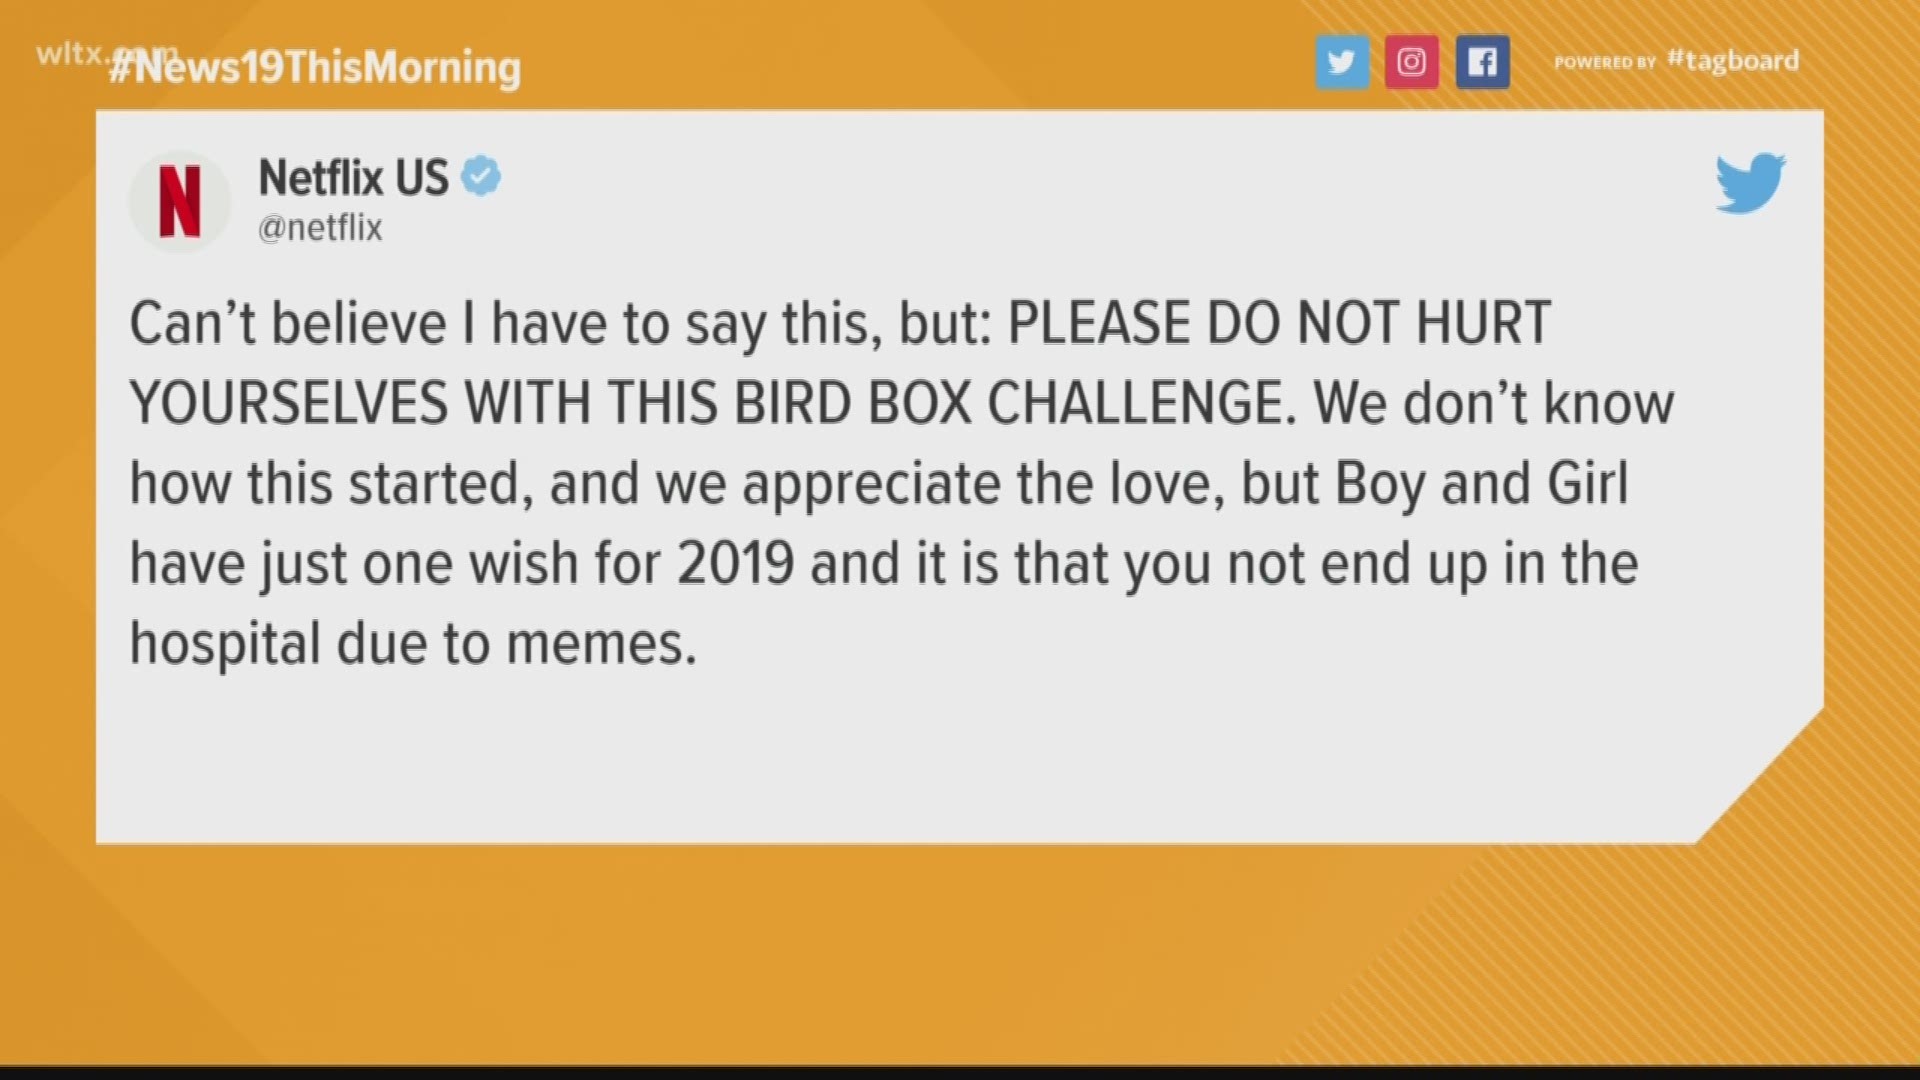 Trending this morning: Netflix is pleading with people to stop participating in the Bird Box challenge, Snapchat has introduced filters for your furry friends and a bath could help you reach your weight loss goal.